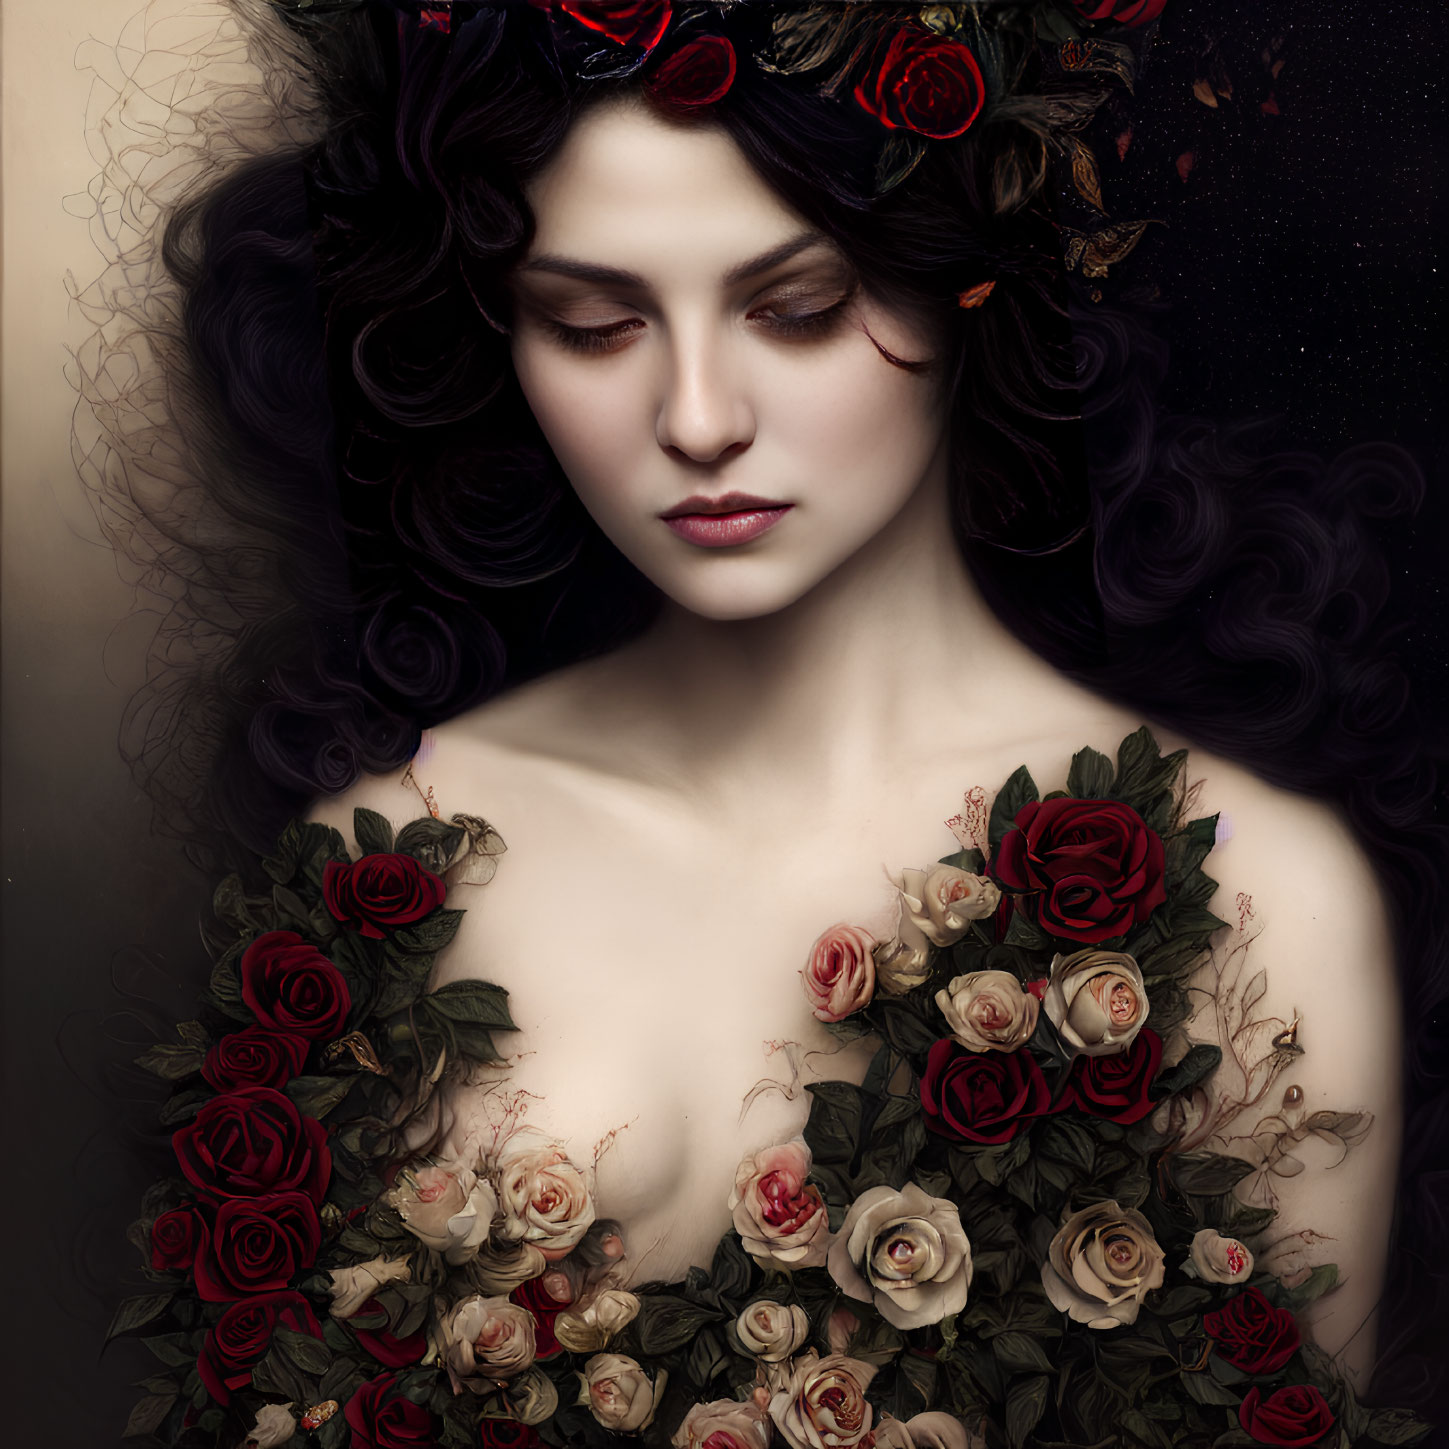 Portrait of woman with dark hair and red roses on shoulders against dark background